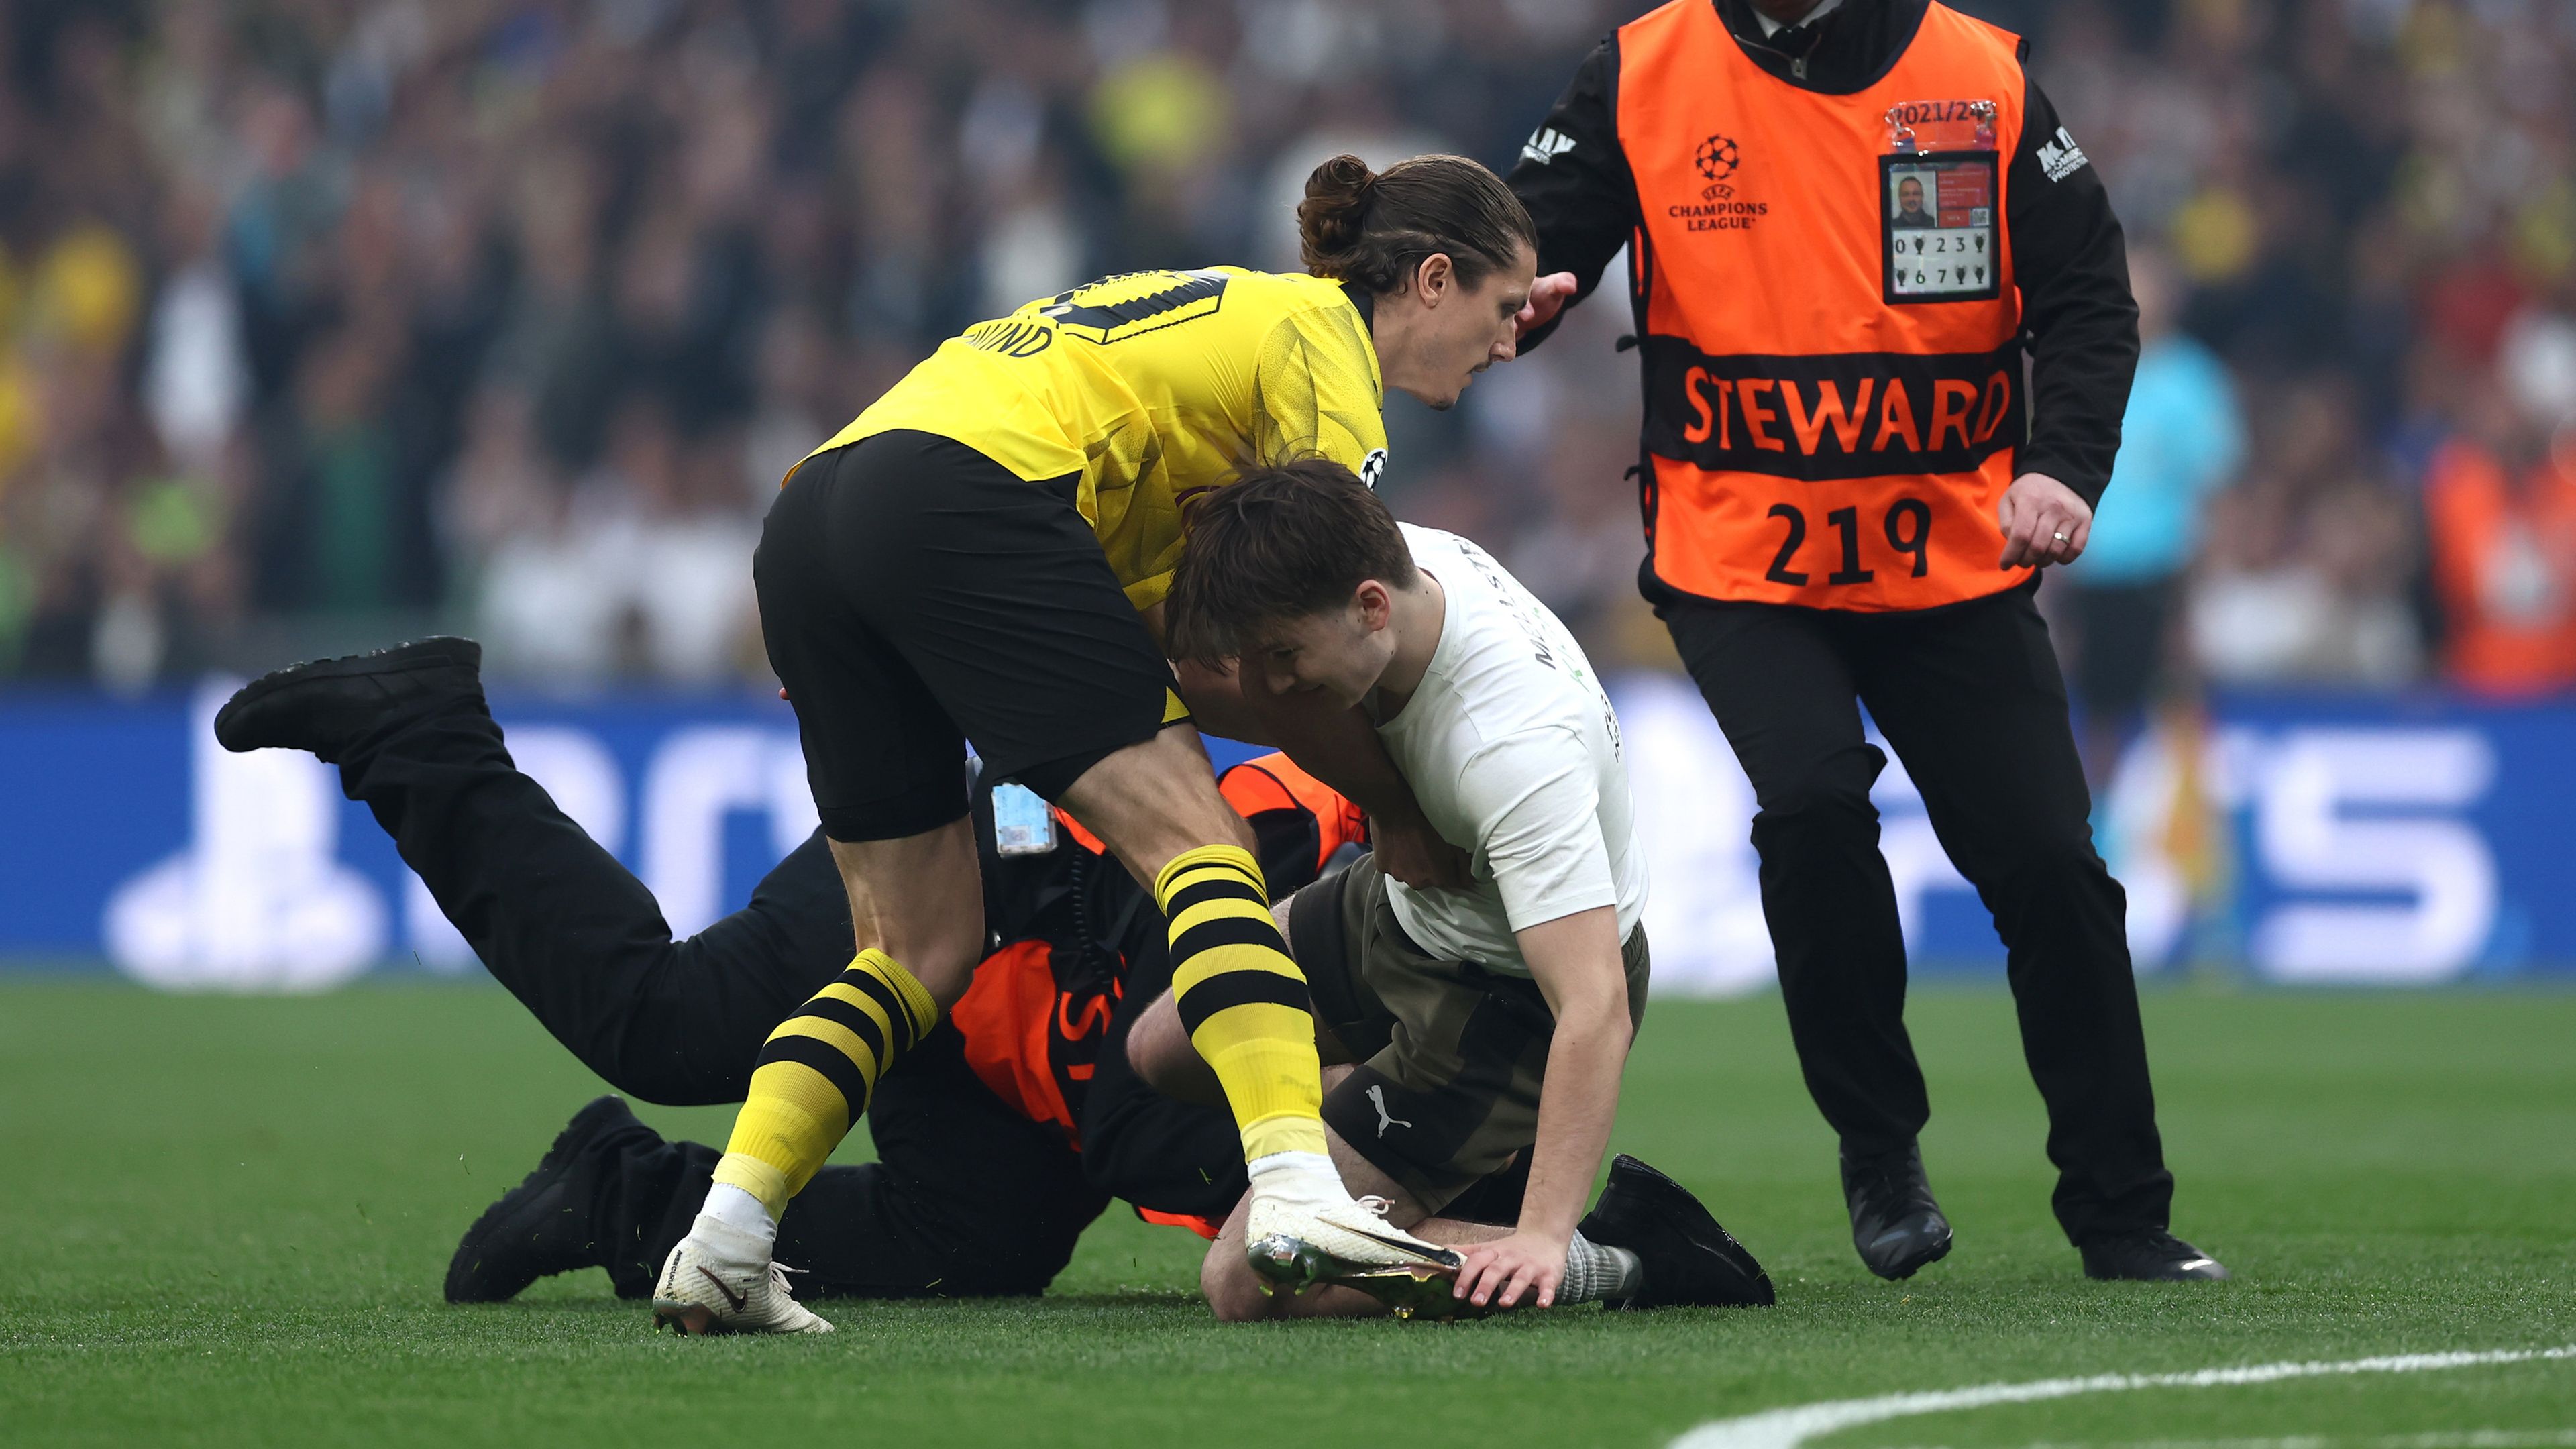 Marcel Sabitzer of Borussia Dortmund assists members of security as they stop a pitch invader.